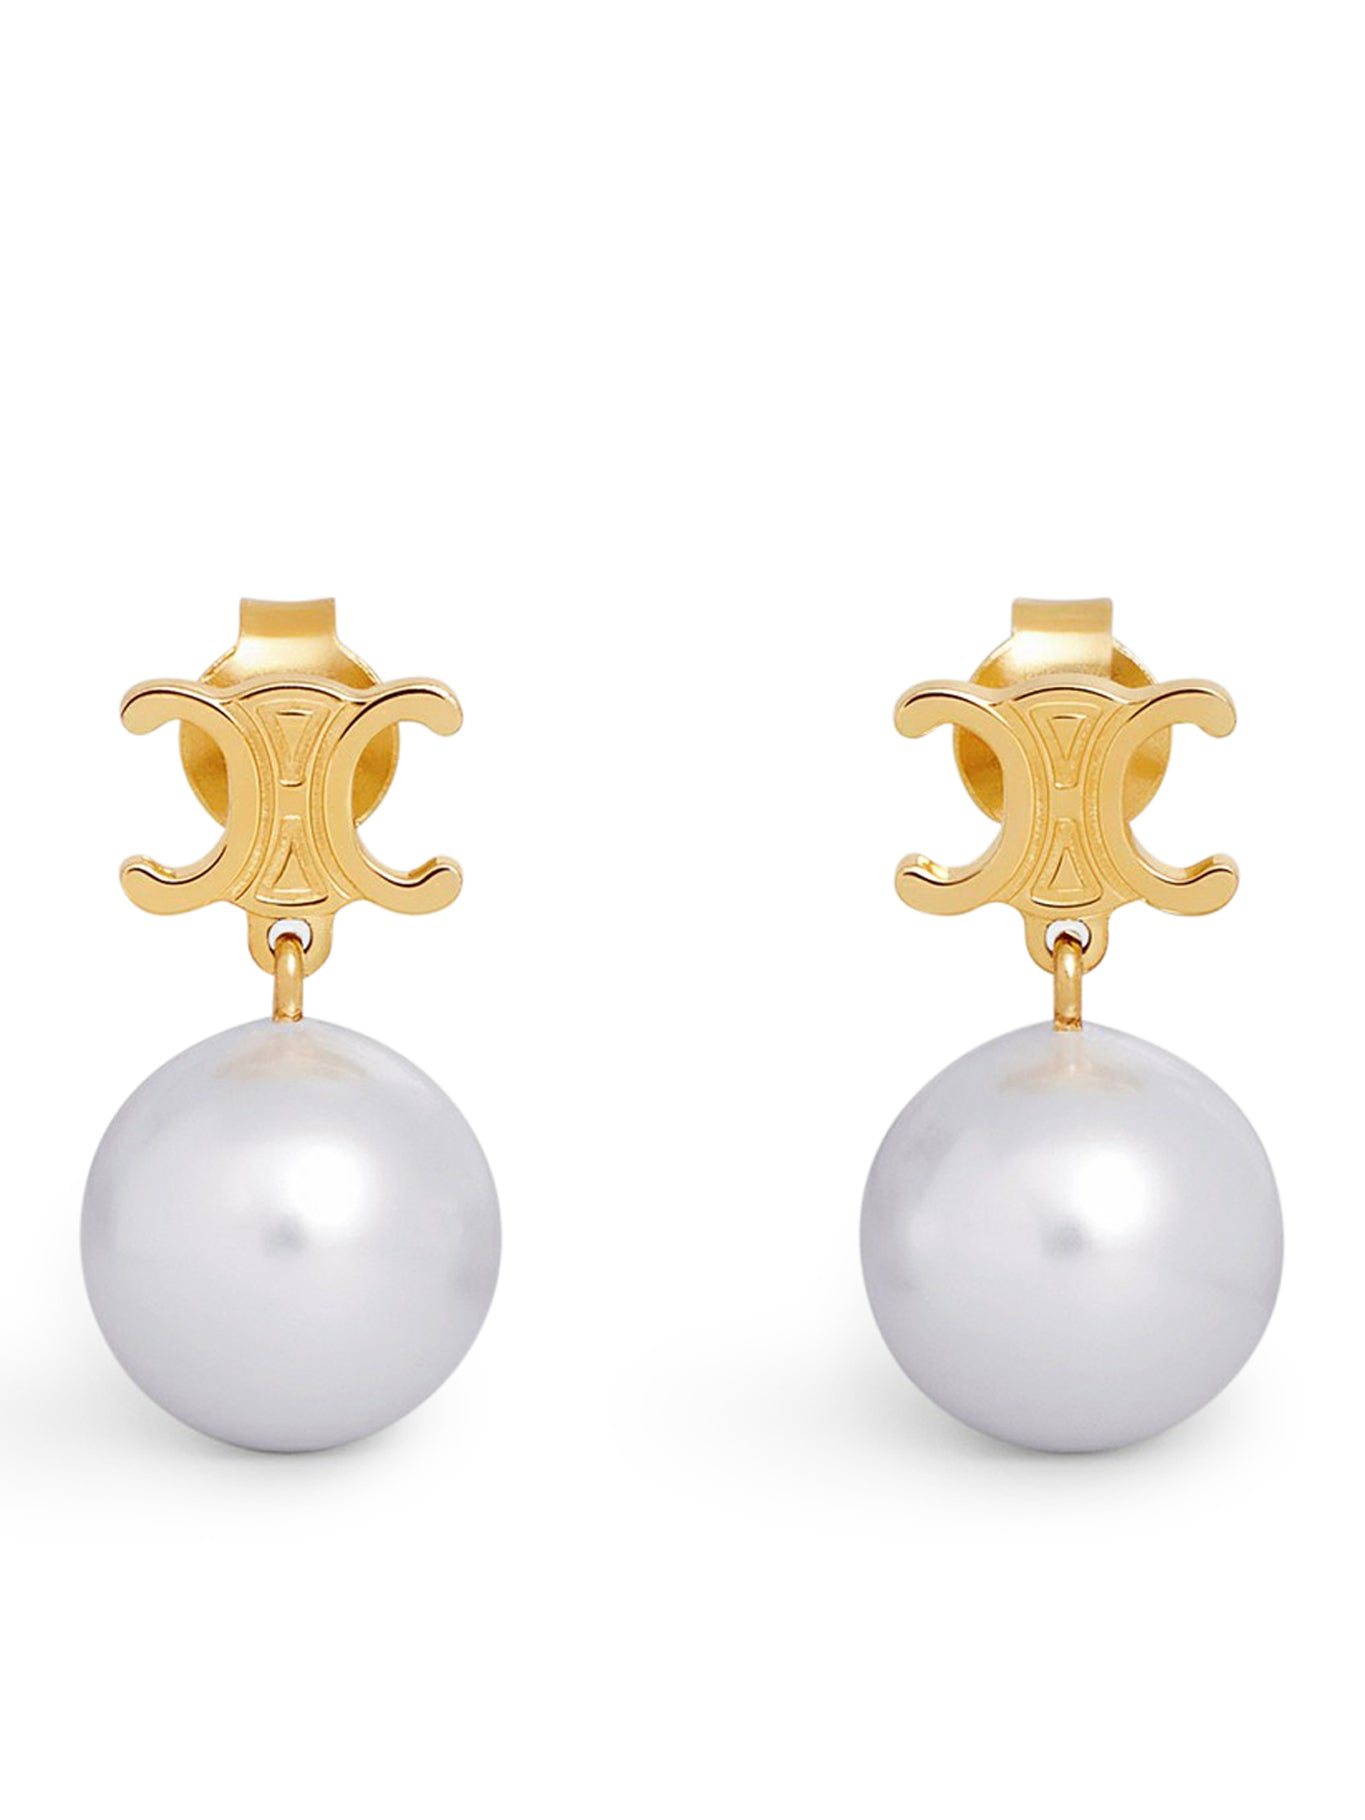 EARRINGS WITH TRIOMPHE PEARLS IN GOLD FINISH BRASS AND GOLD / IVORY GLASS PEARLS